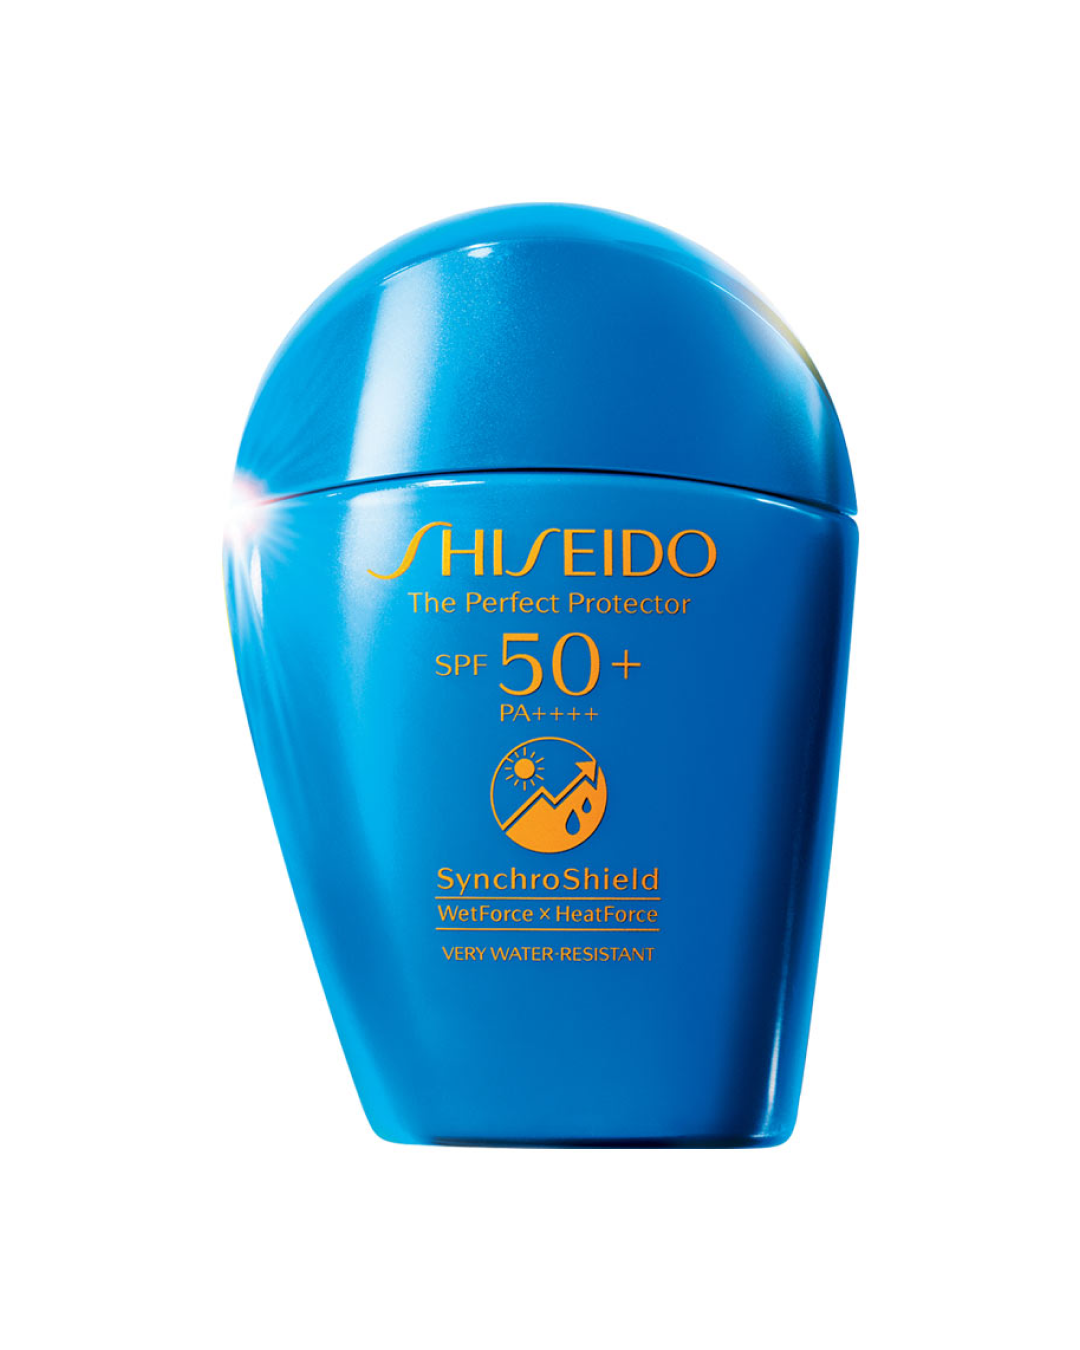 Shiseido The Perfect Protector SPF50+ PA++++ (50ml) - Best Buy World Philippines